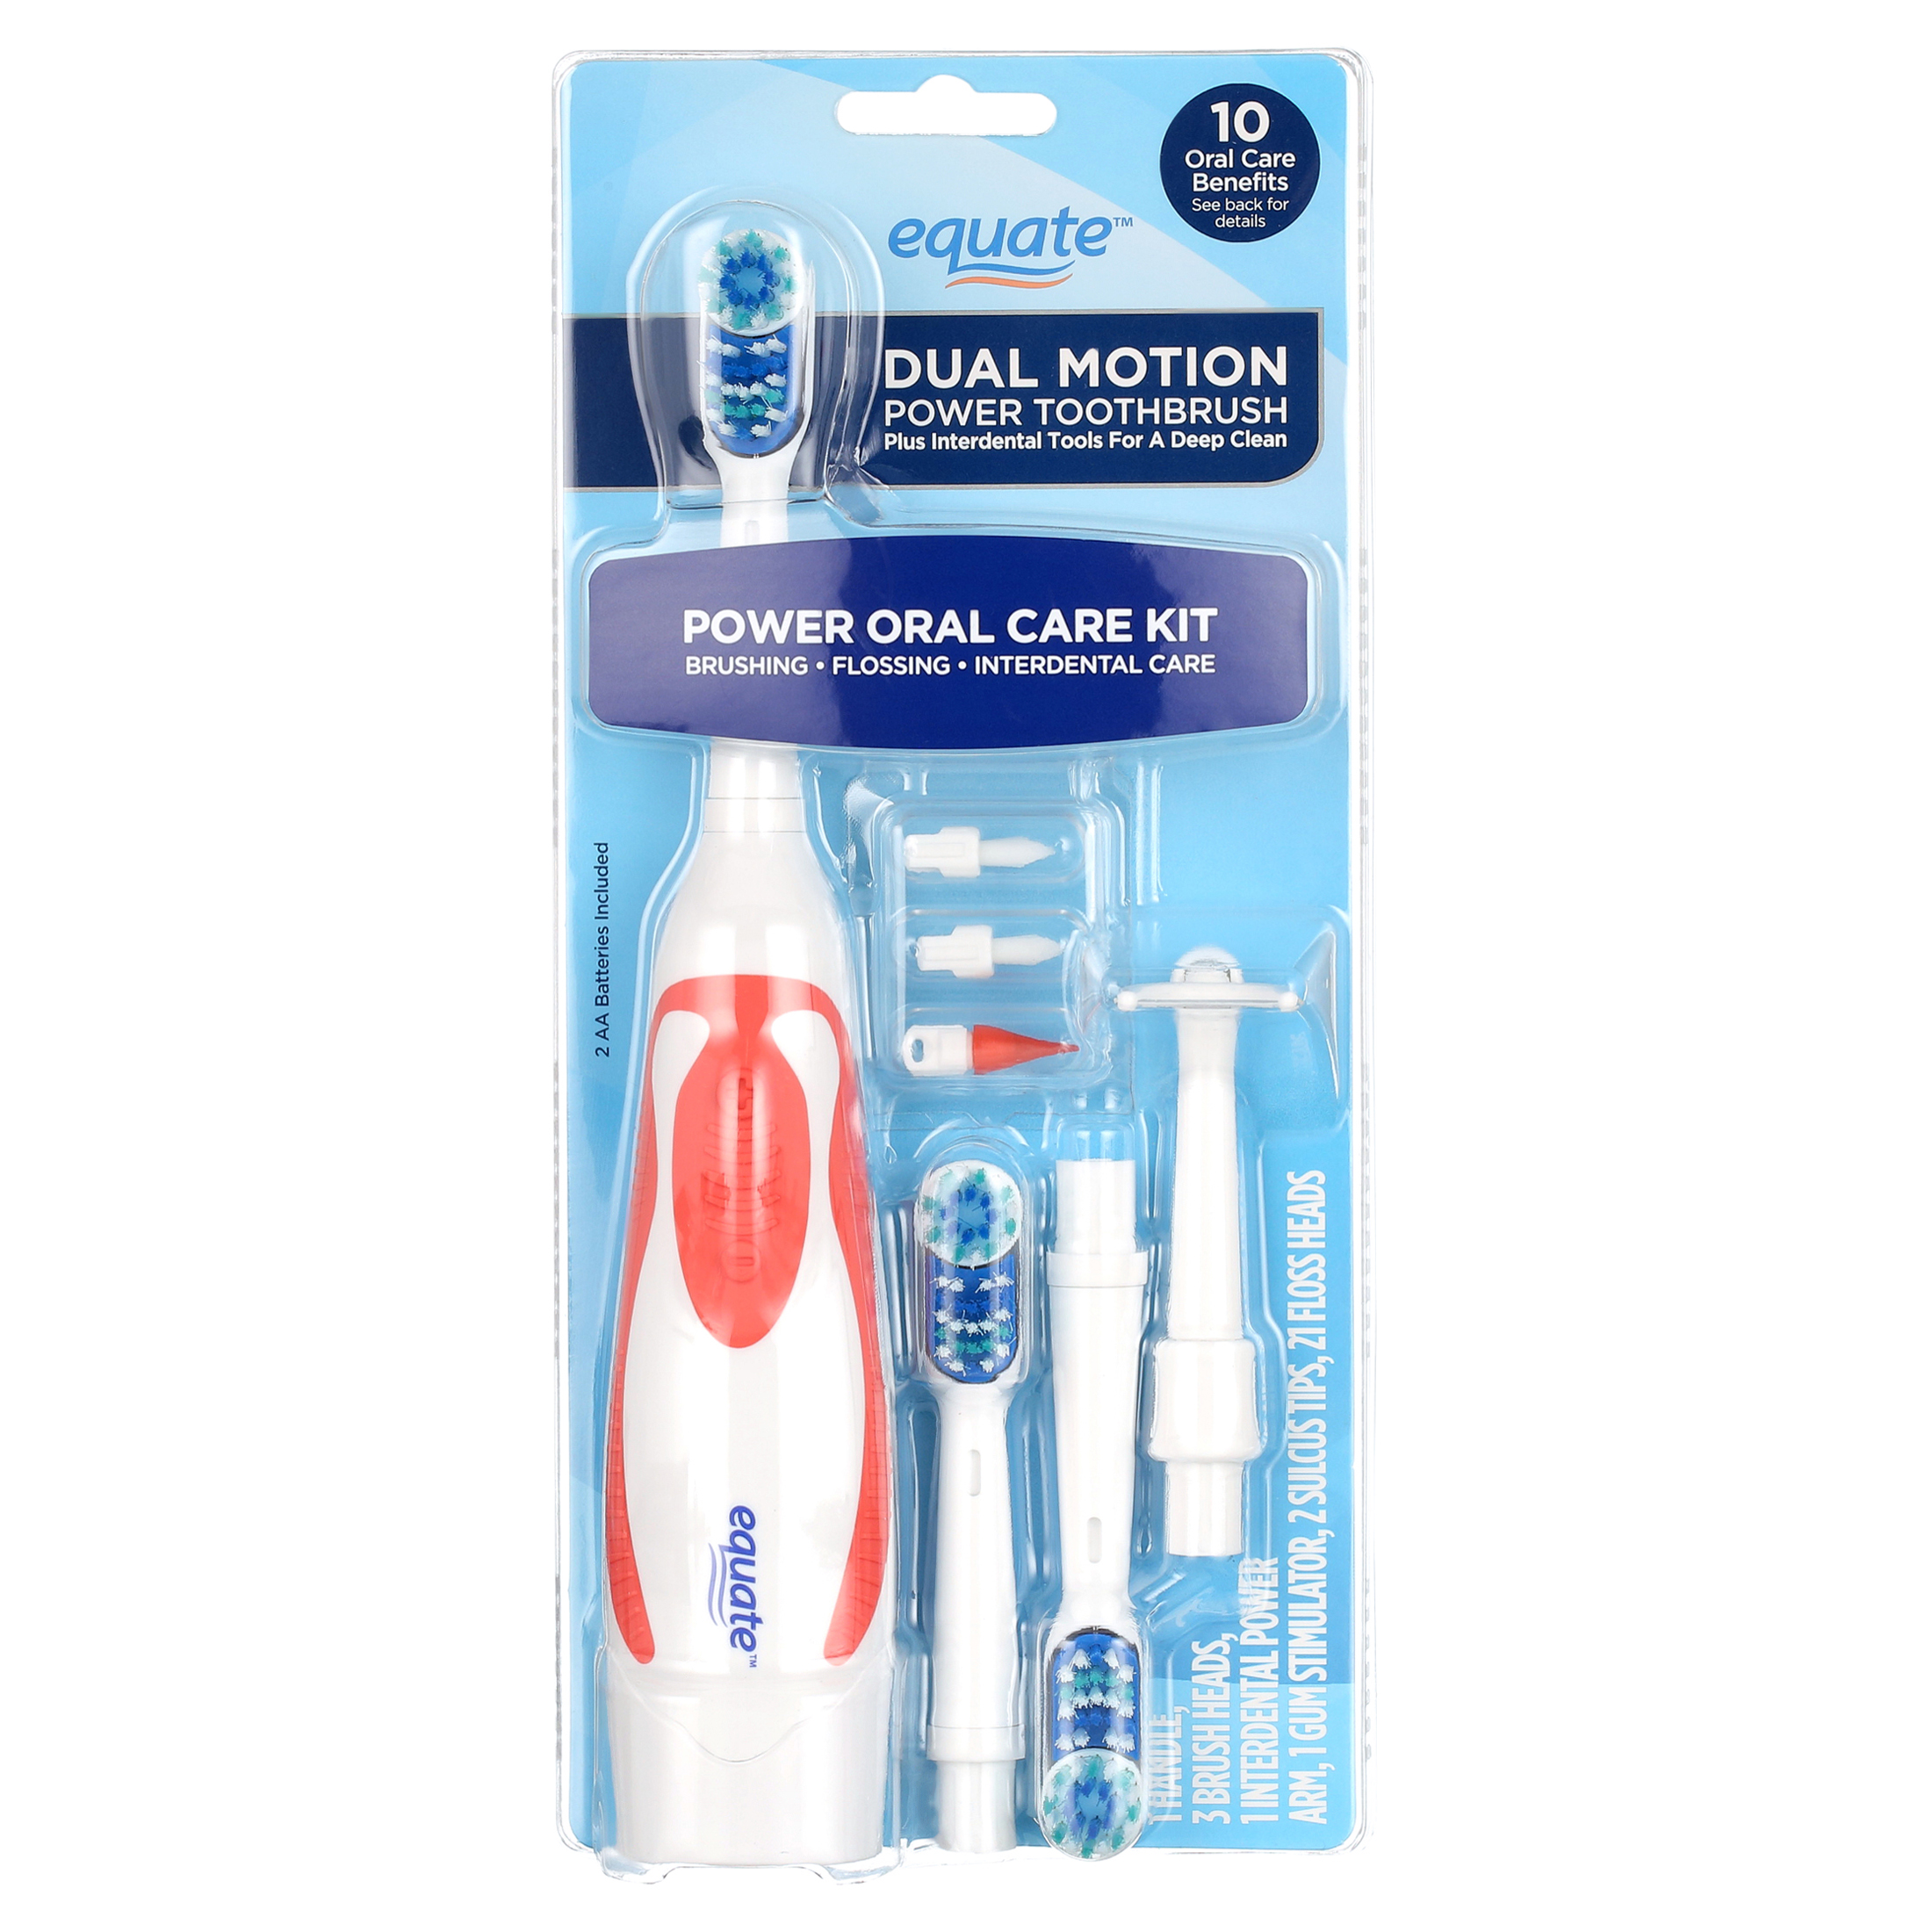 Equate Dual Motion Power Oral Care Kit with Interdental Tools, Soft Bristles - image 1 of 15